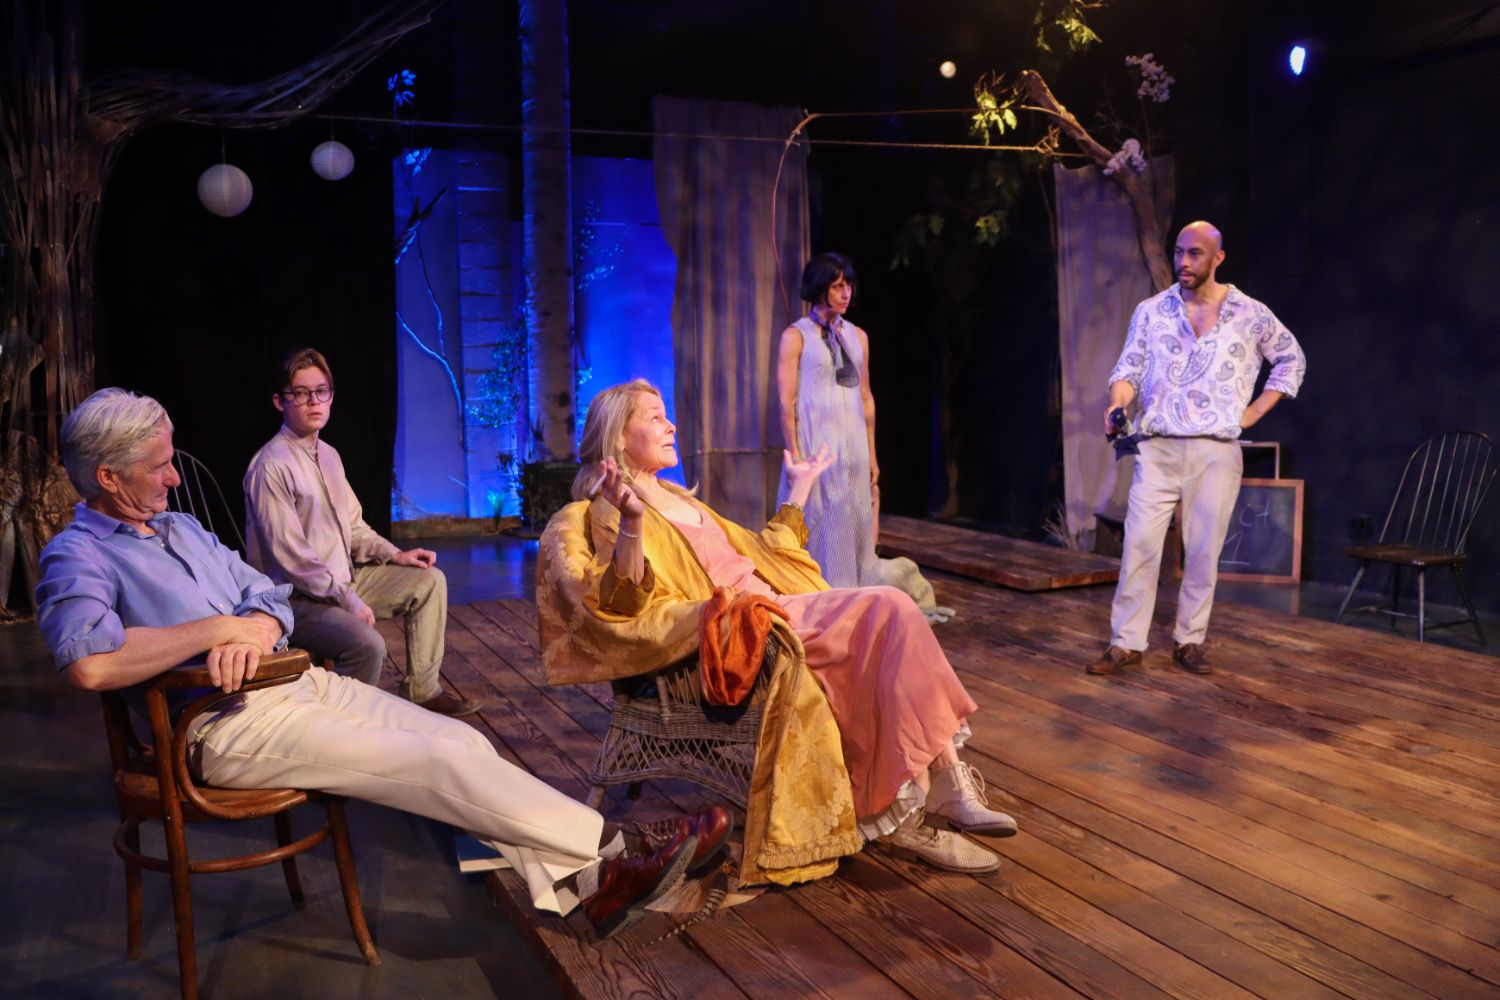 PHOTO: South Pasadena Theatre Workshop | The South Pasadenan | The cast of The Seagull: Kevin Michael Moran, Nick Apostolina, Sally Smythe, Christina Conte, and Kila Packett on stage at South Pasadena Theatre Workshop.